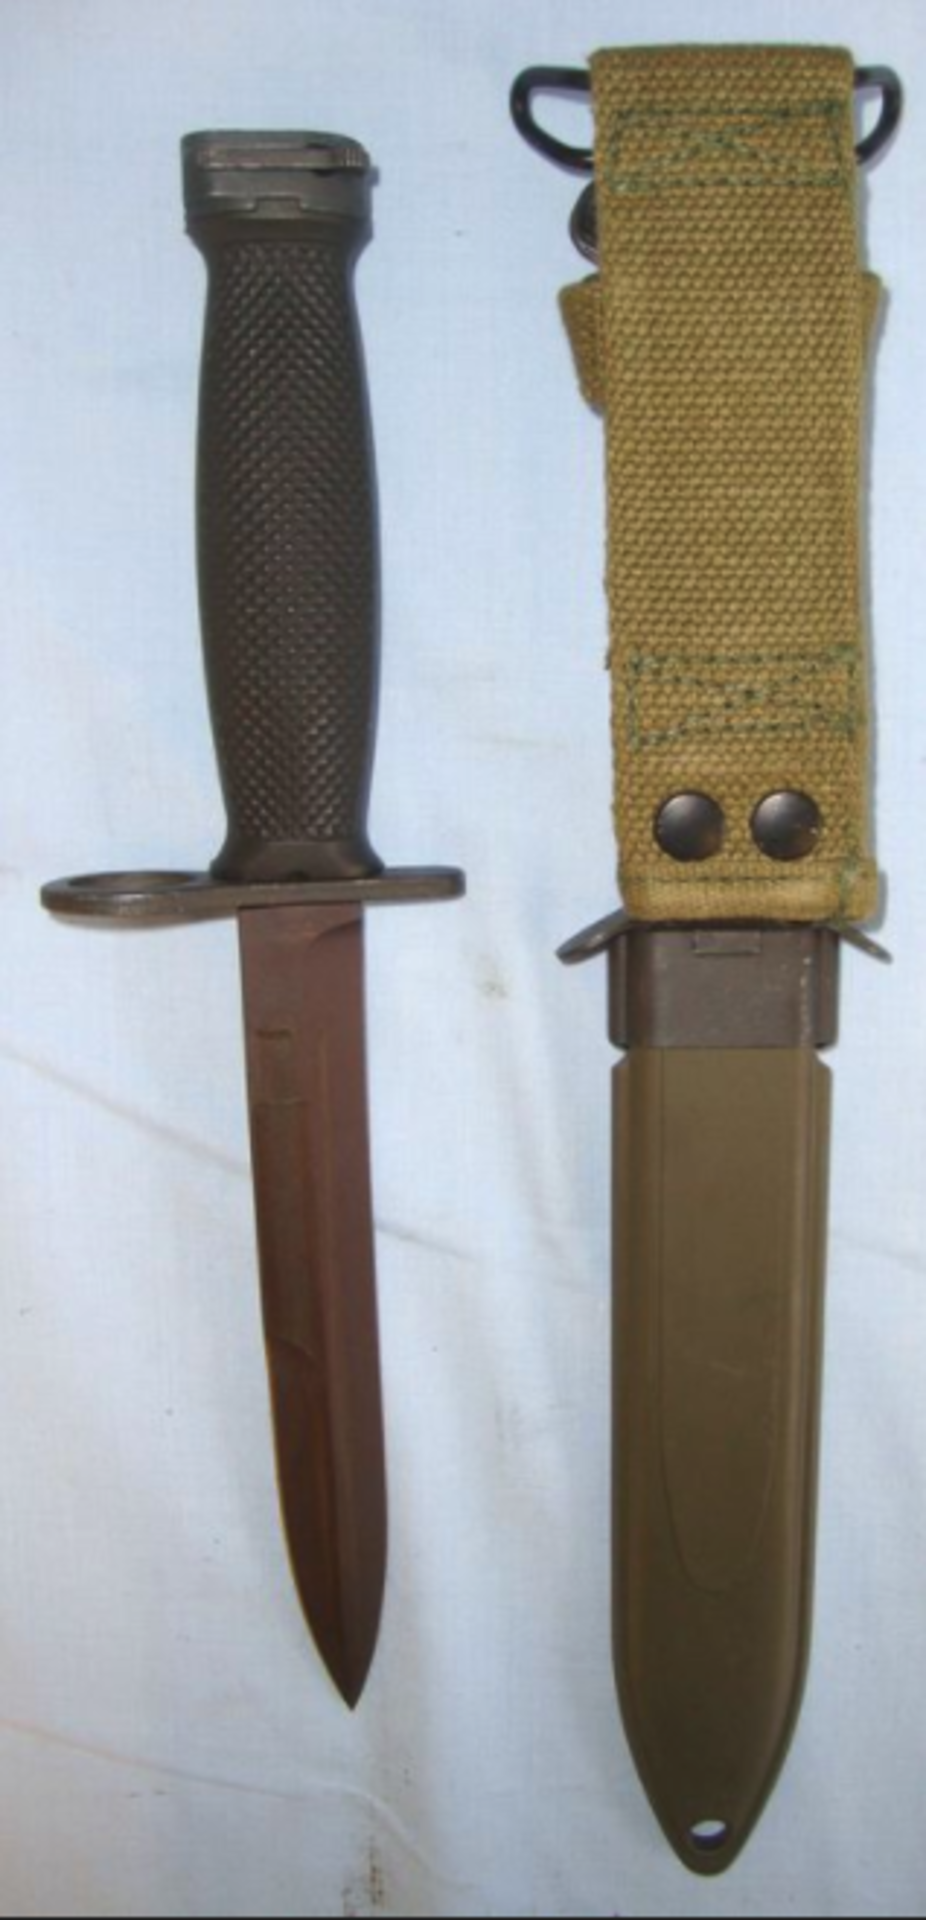 U.S. M7 Bayonet For M16/AR 15 Assault Rifles In It's Correct U.S. M8A1 Scabbard. - Image 3 of 3